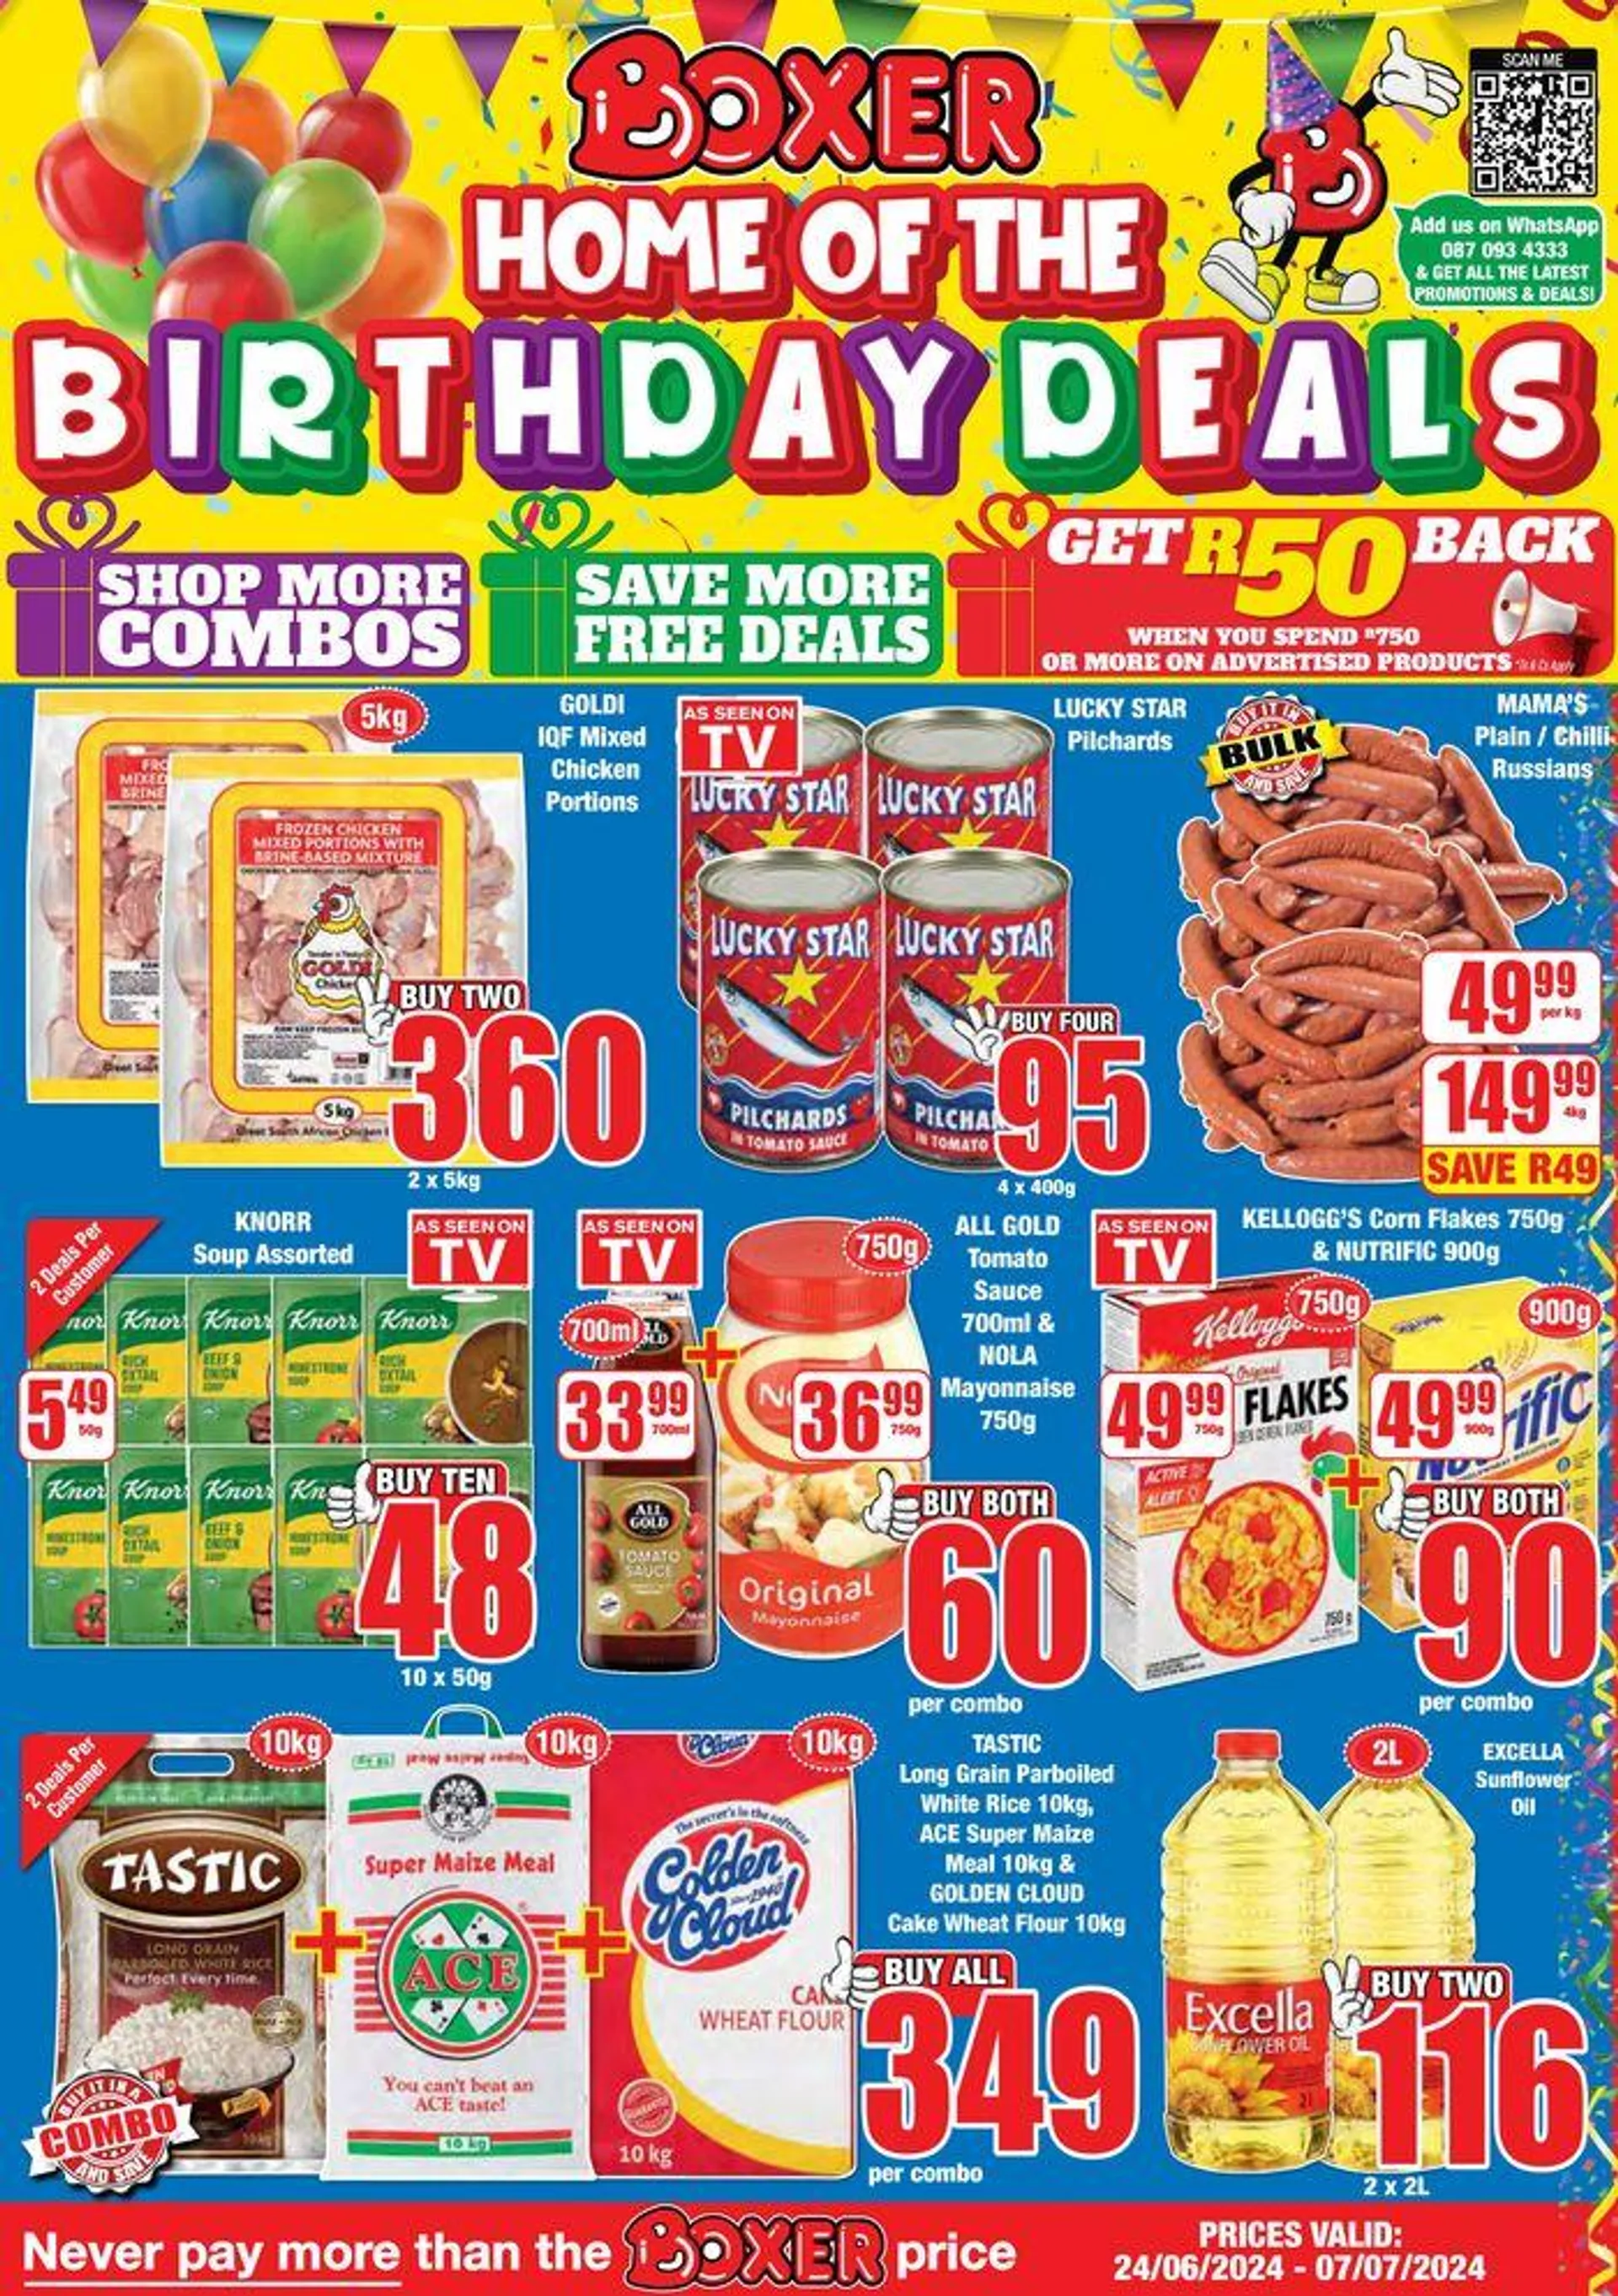 HOME OF THE BIRTHDAY DEAL - 1